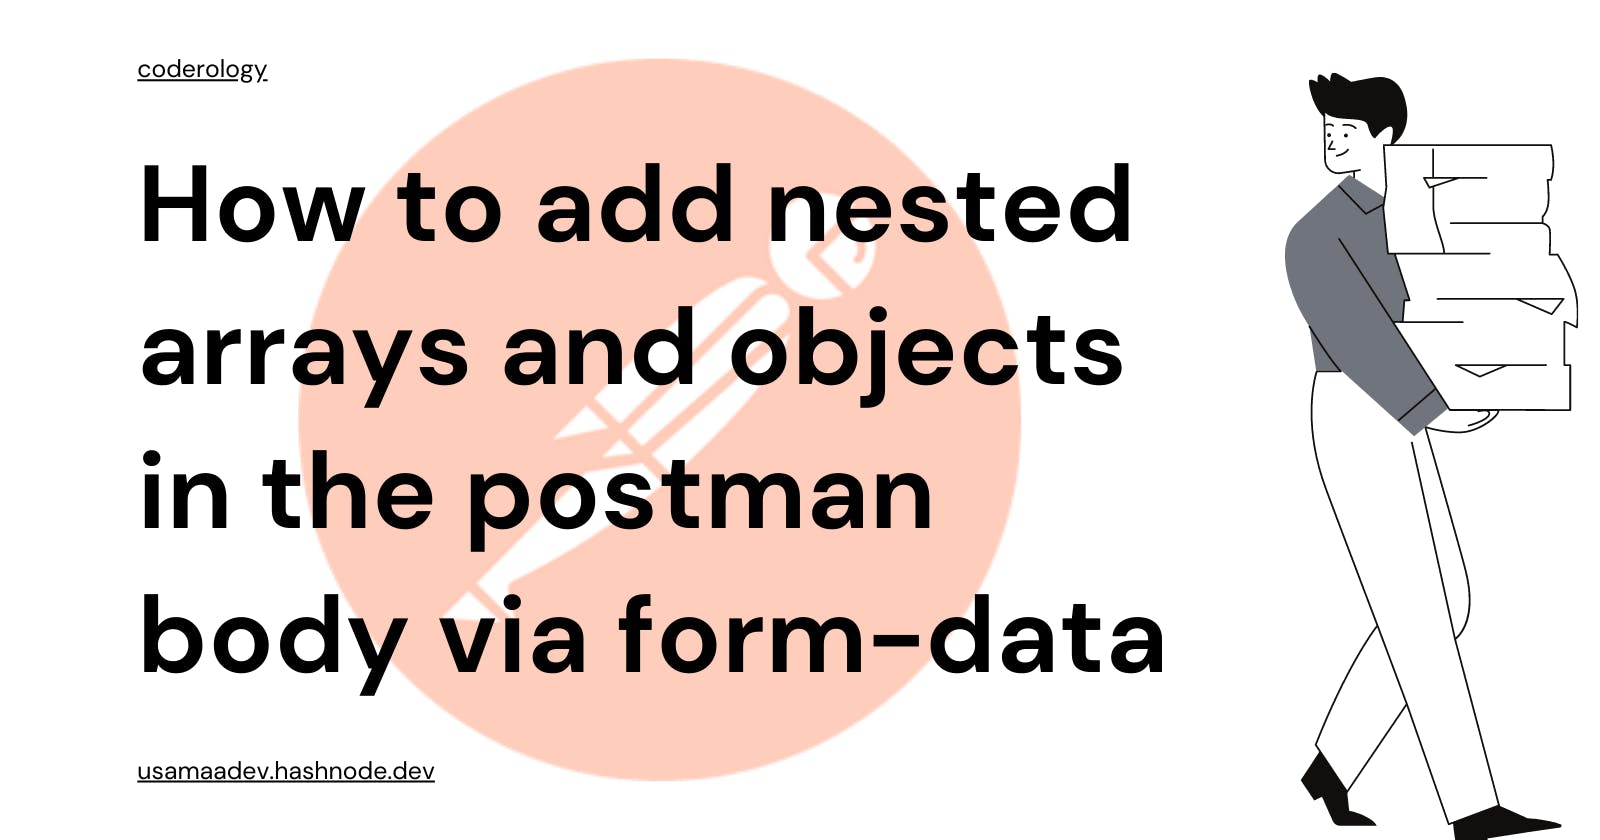 How to add nested arrays and objects in the postman body via form-data